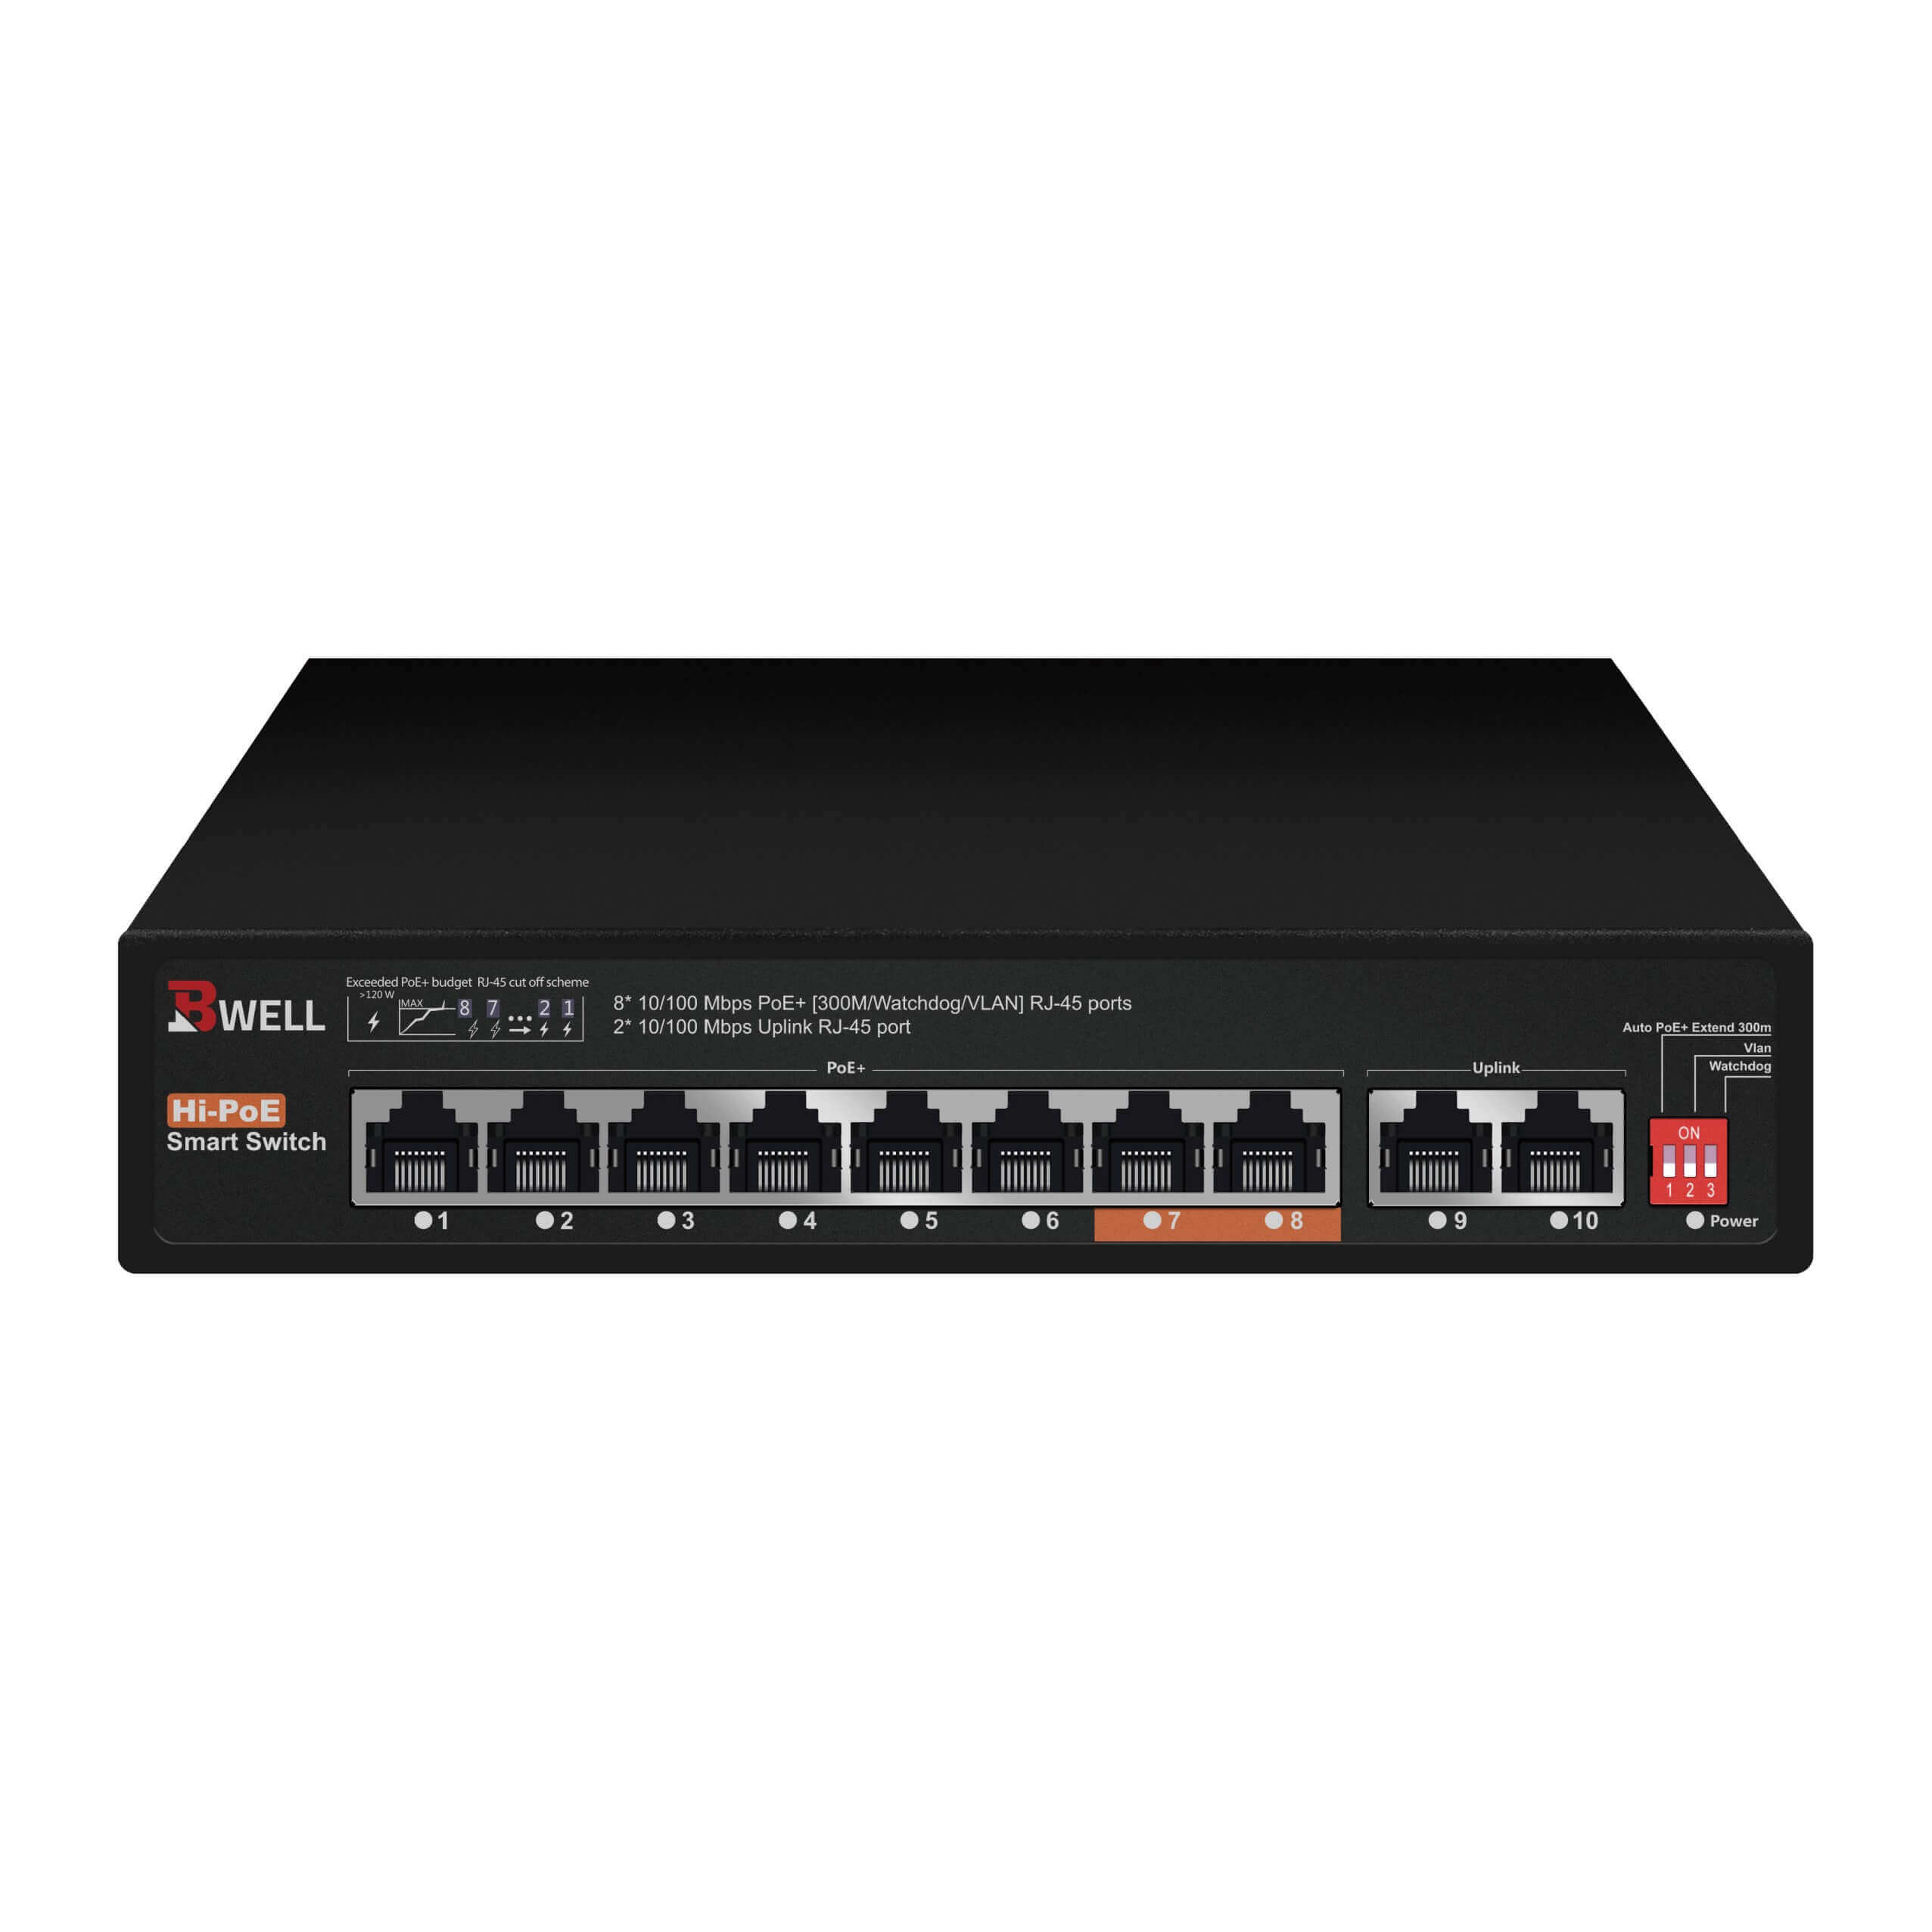 8 Port PoE Switch at 10/100 speed + 2 ports for connectivity	